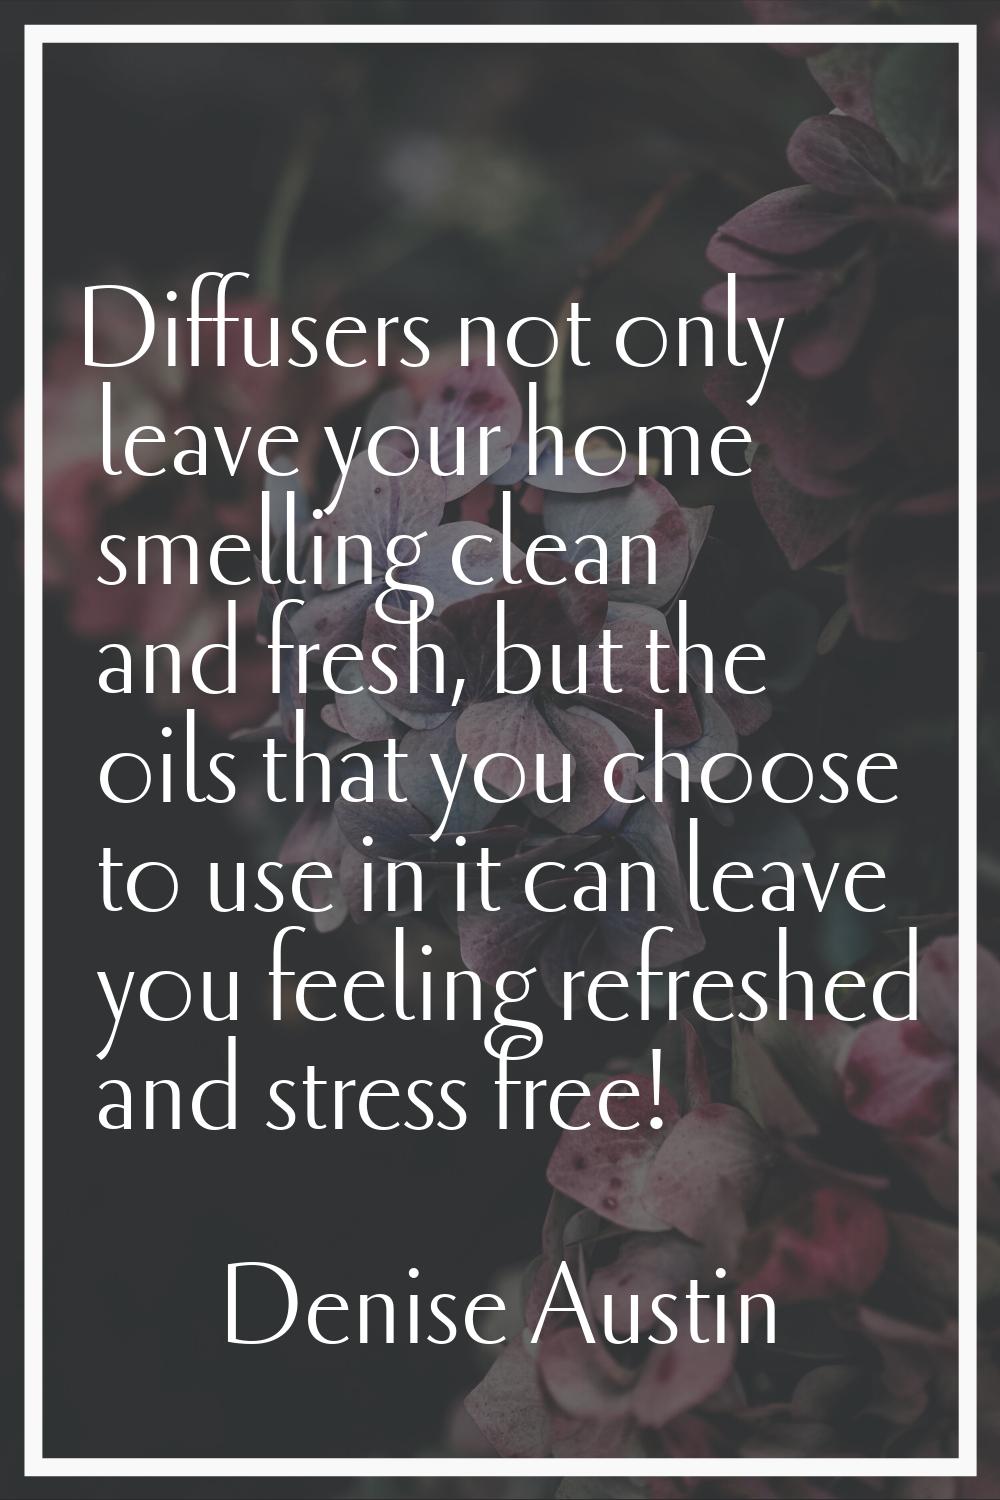 Diffusers not only leave your home smelling clean and fresh, but the oils that you choose to use in